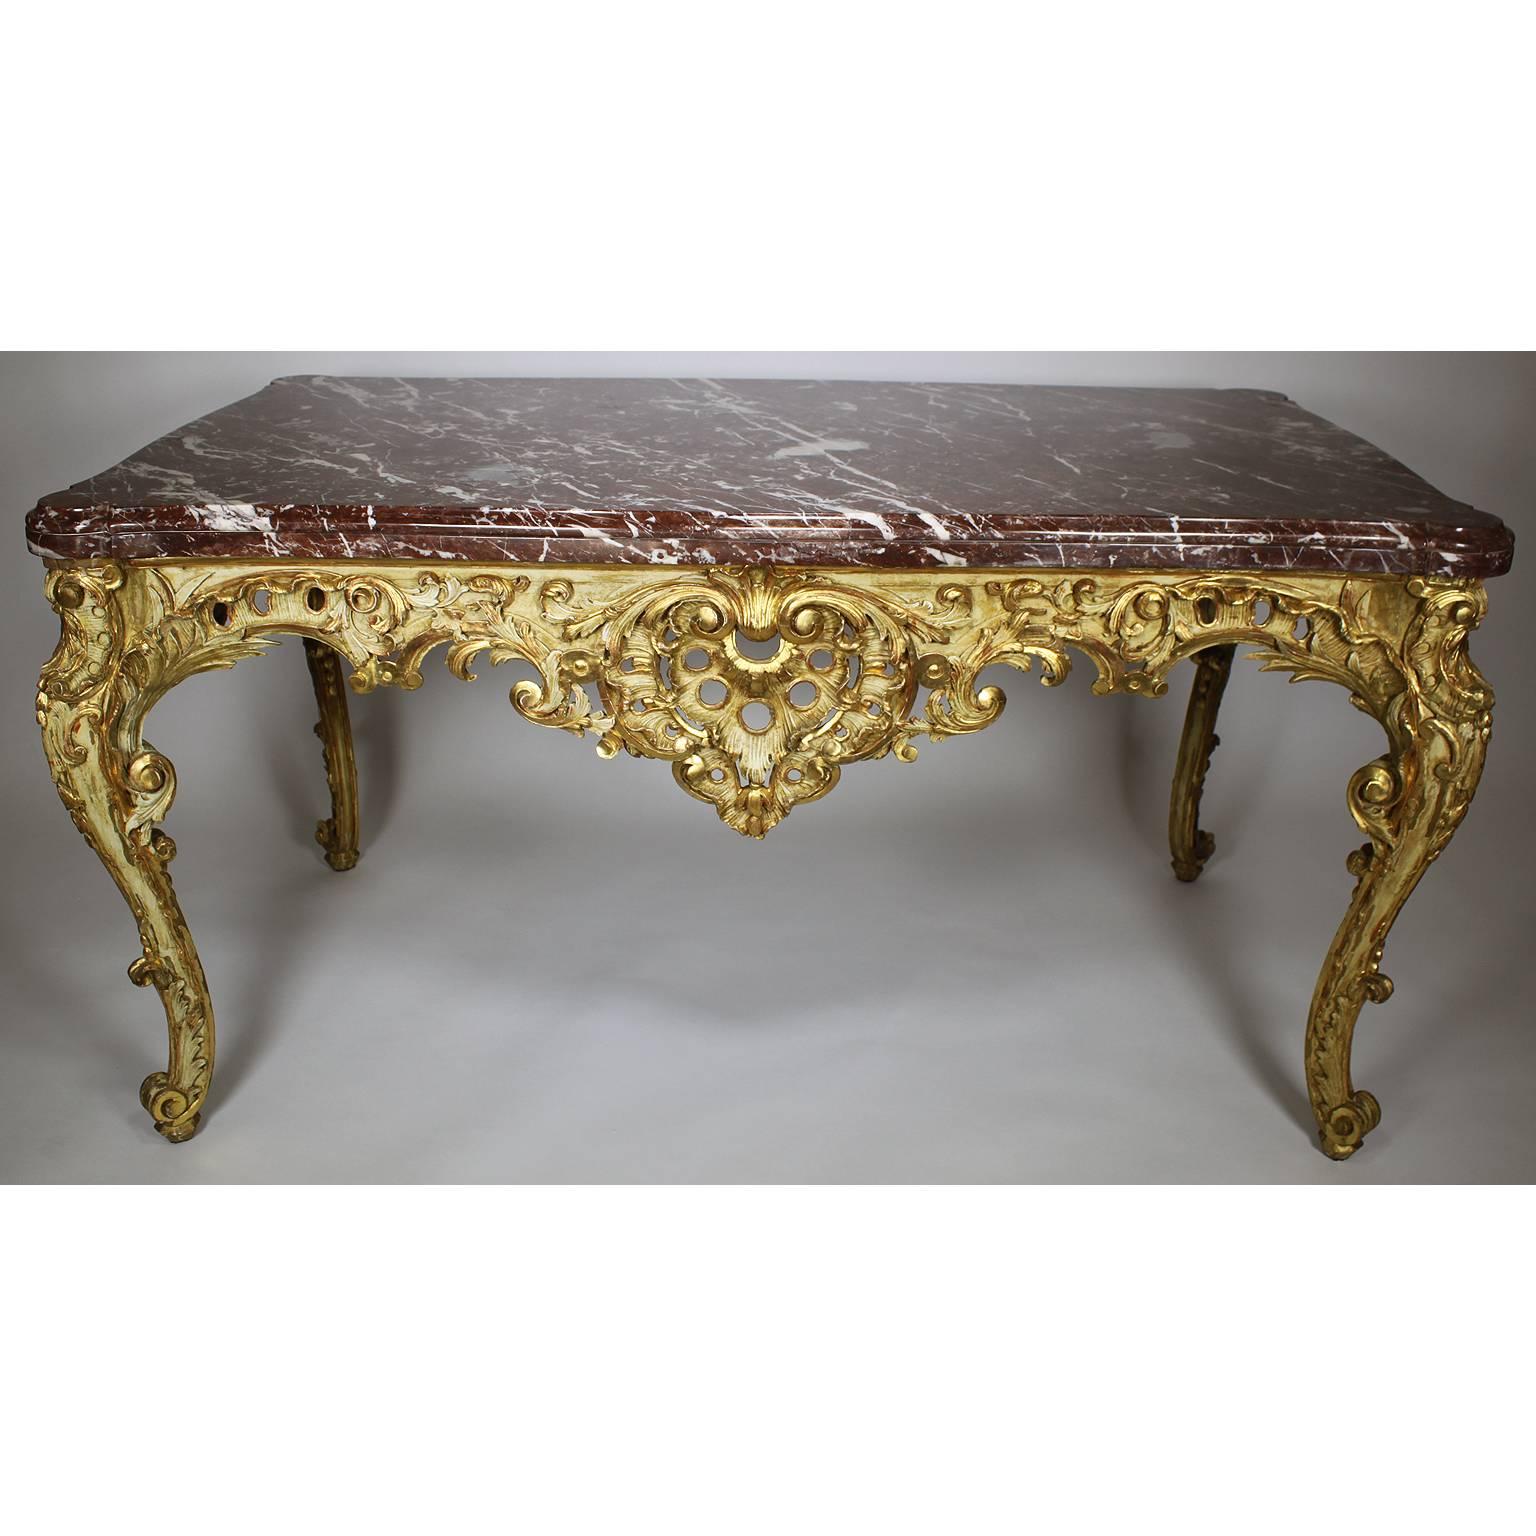 A fine and rare French Rococo Revival 19th century Louis XV style parcel-giltwood carved centre table with marble top. The intricately and partially distressed gilded and cream colored carved apron with scrolls and floral designs, raised on four